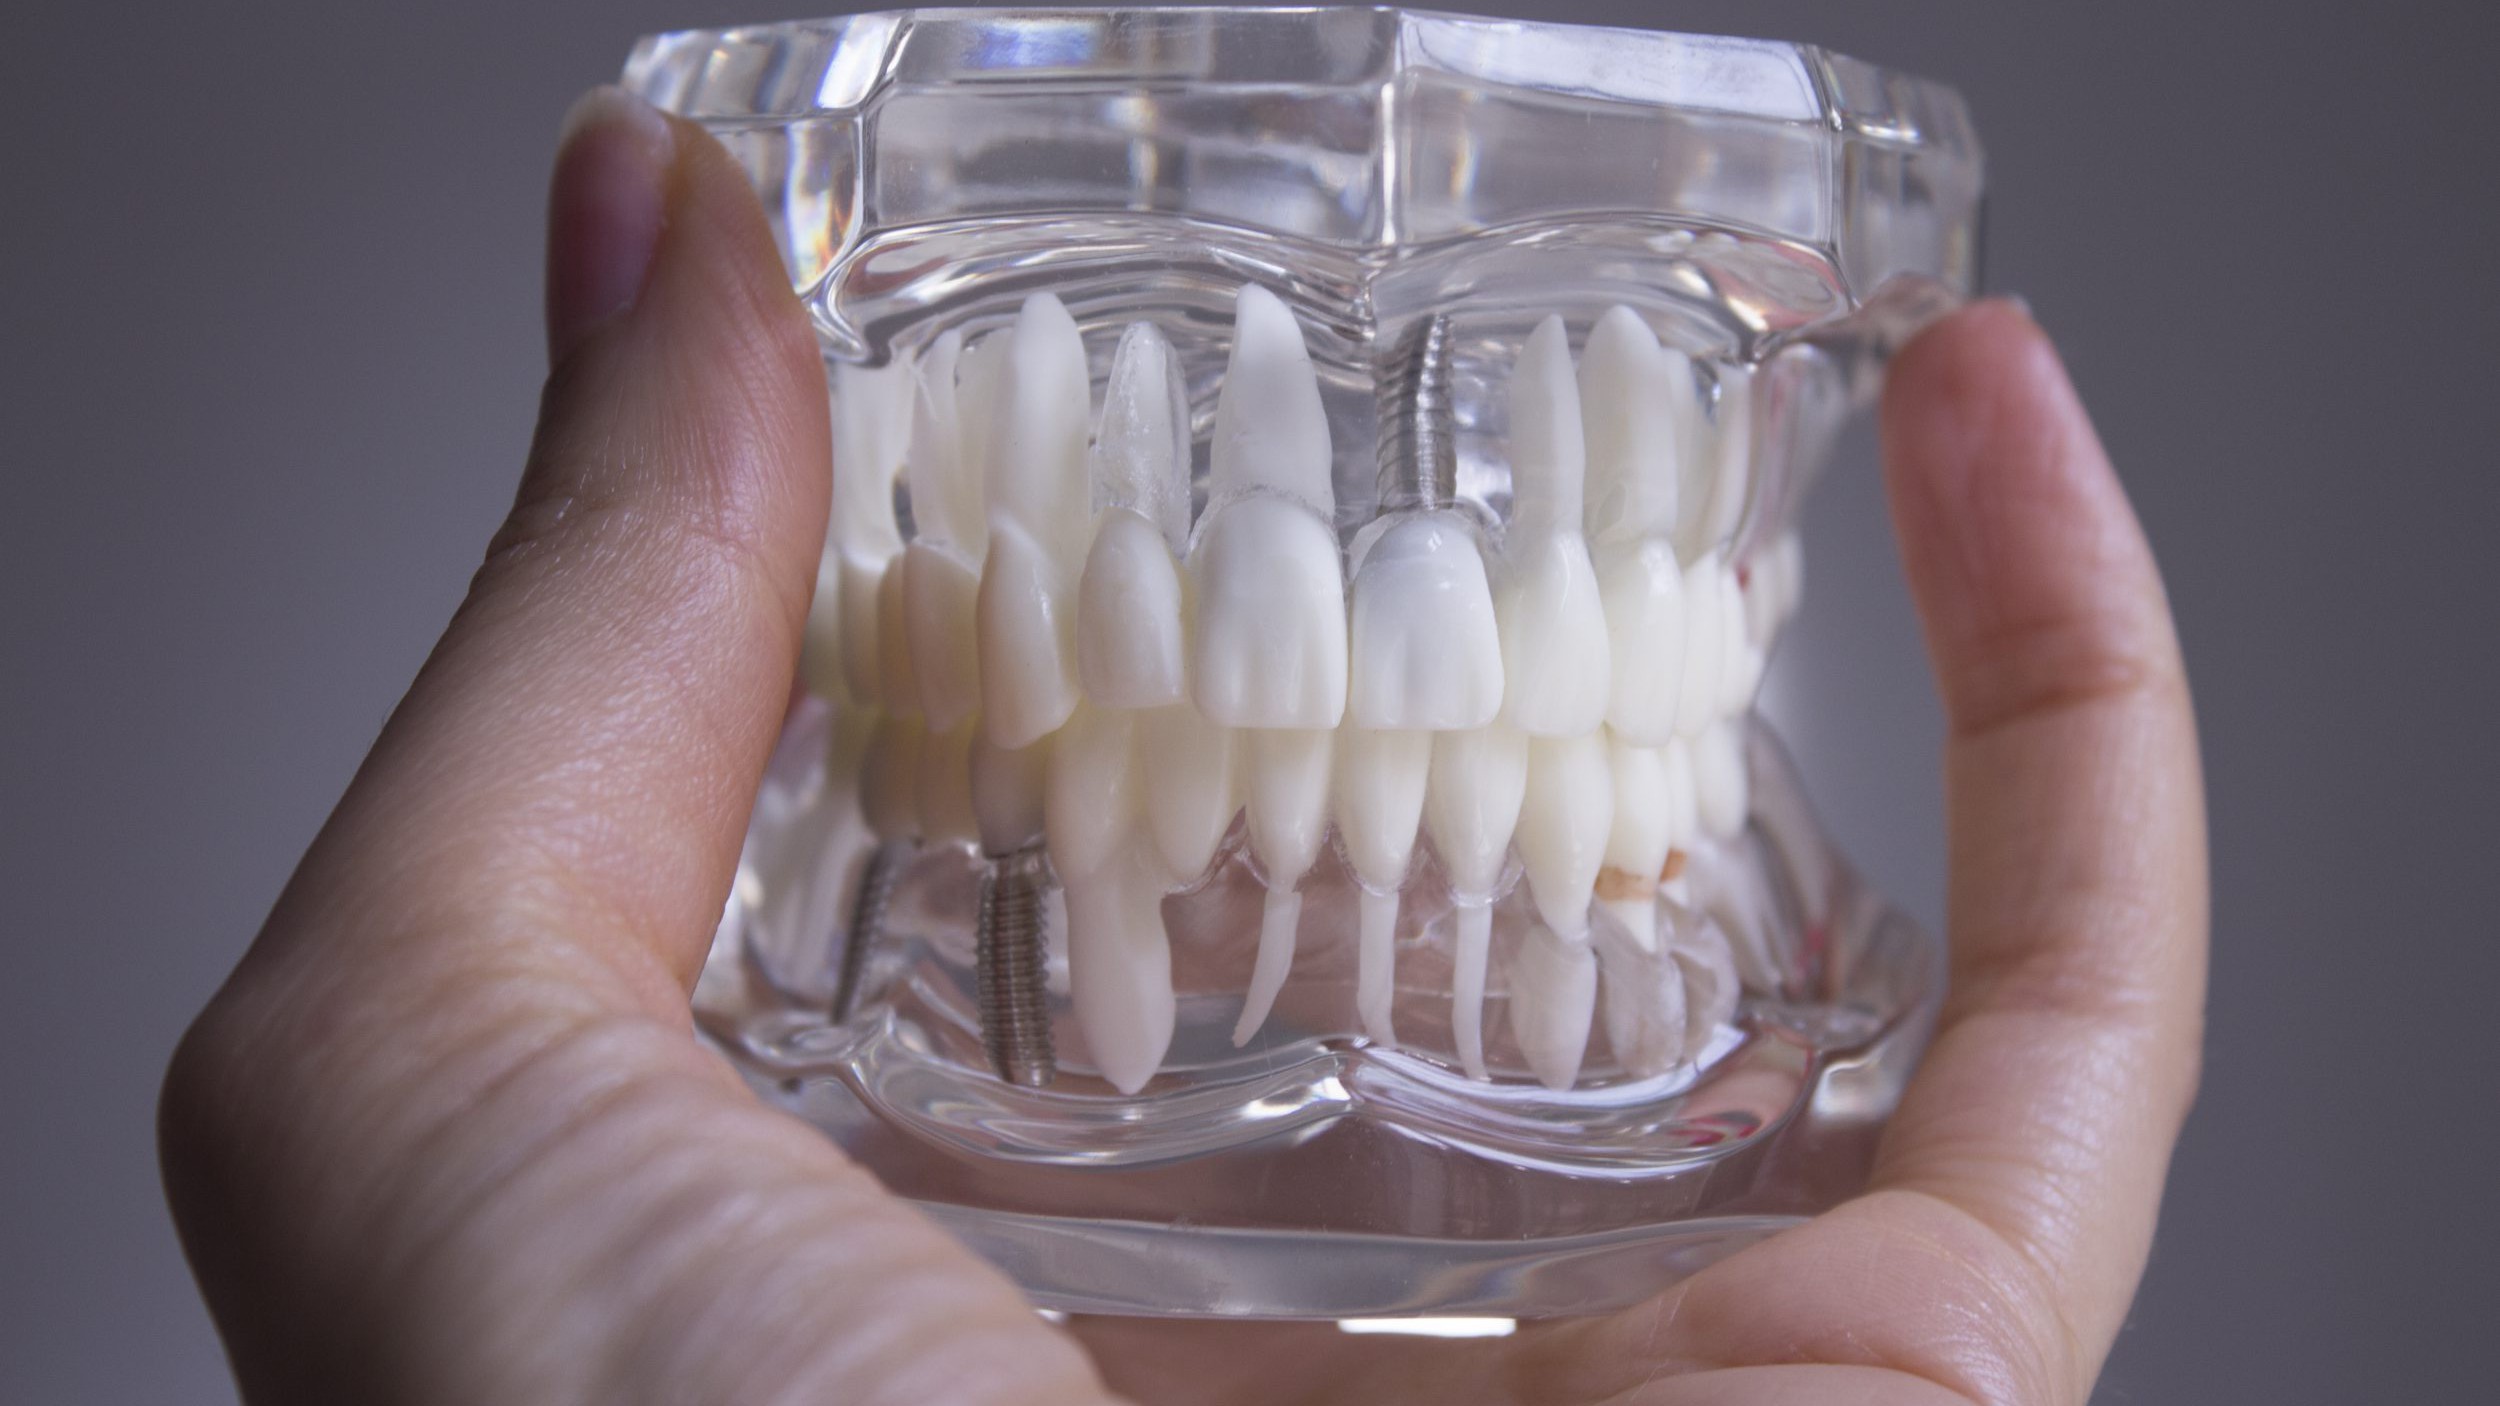 False teeth gripped by the hand of a woman.